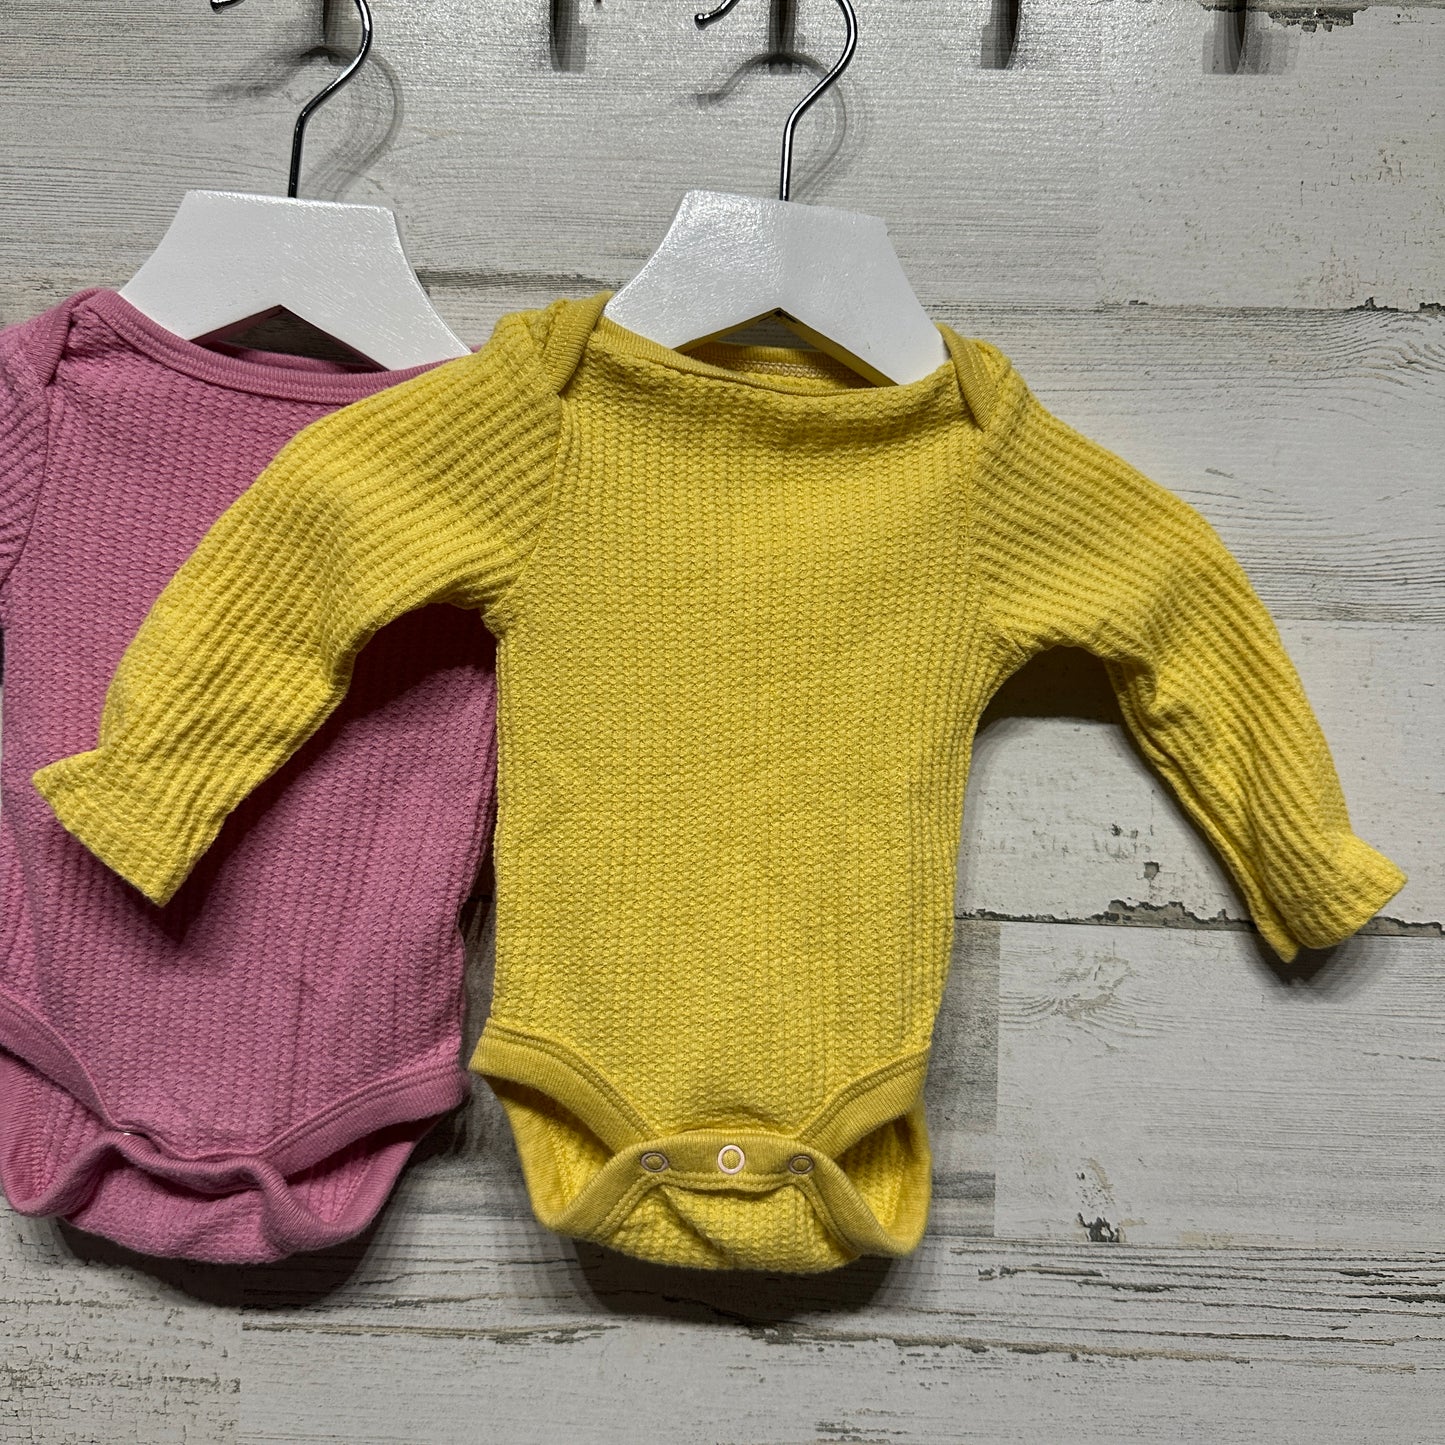 Girls Size Newborn Cloud Island Thermal Onesie Lot (3 pieces) - Good Used Condition